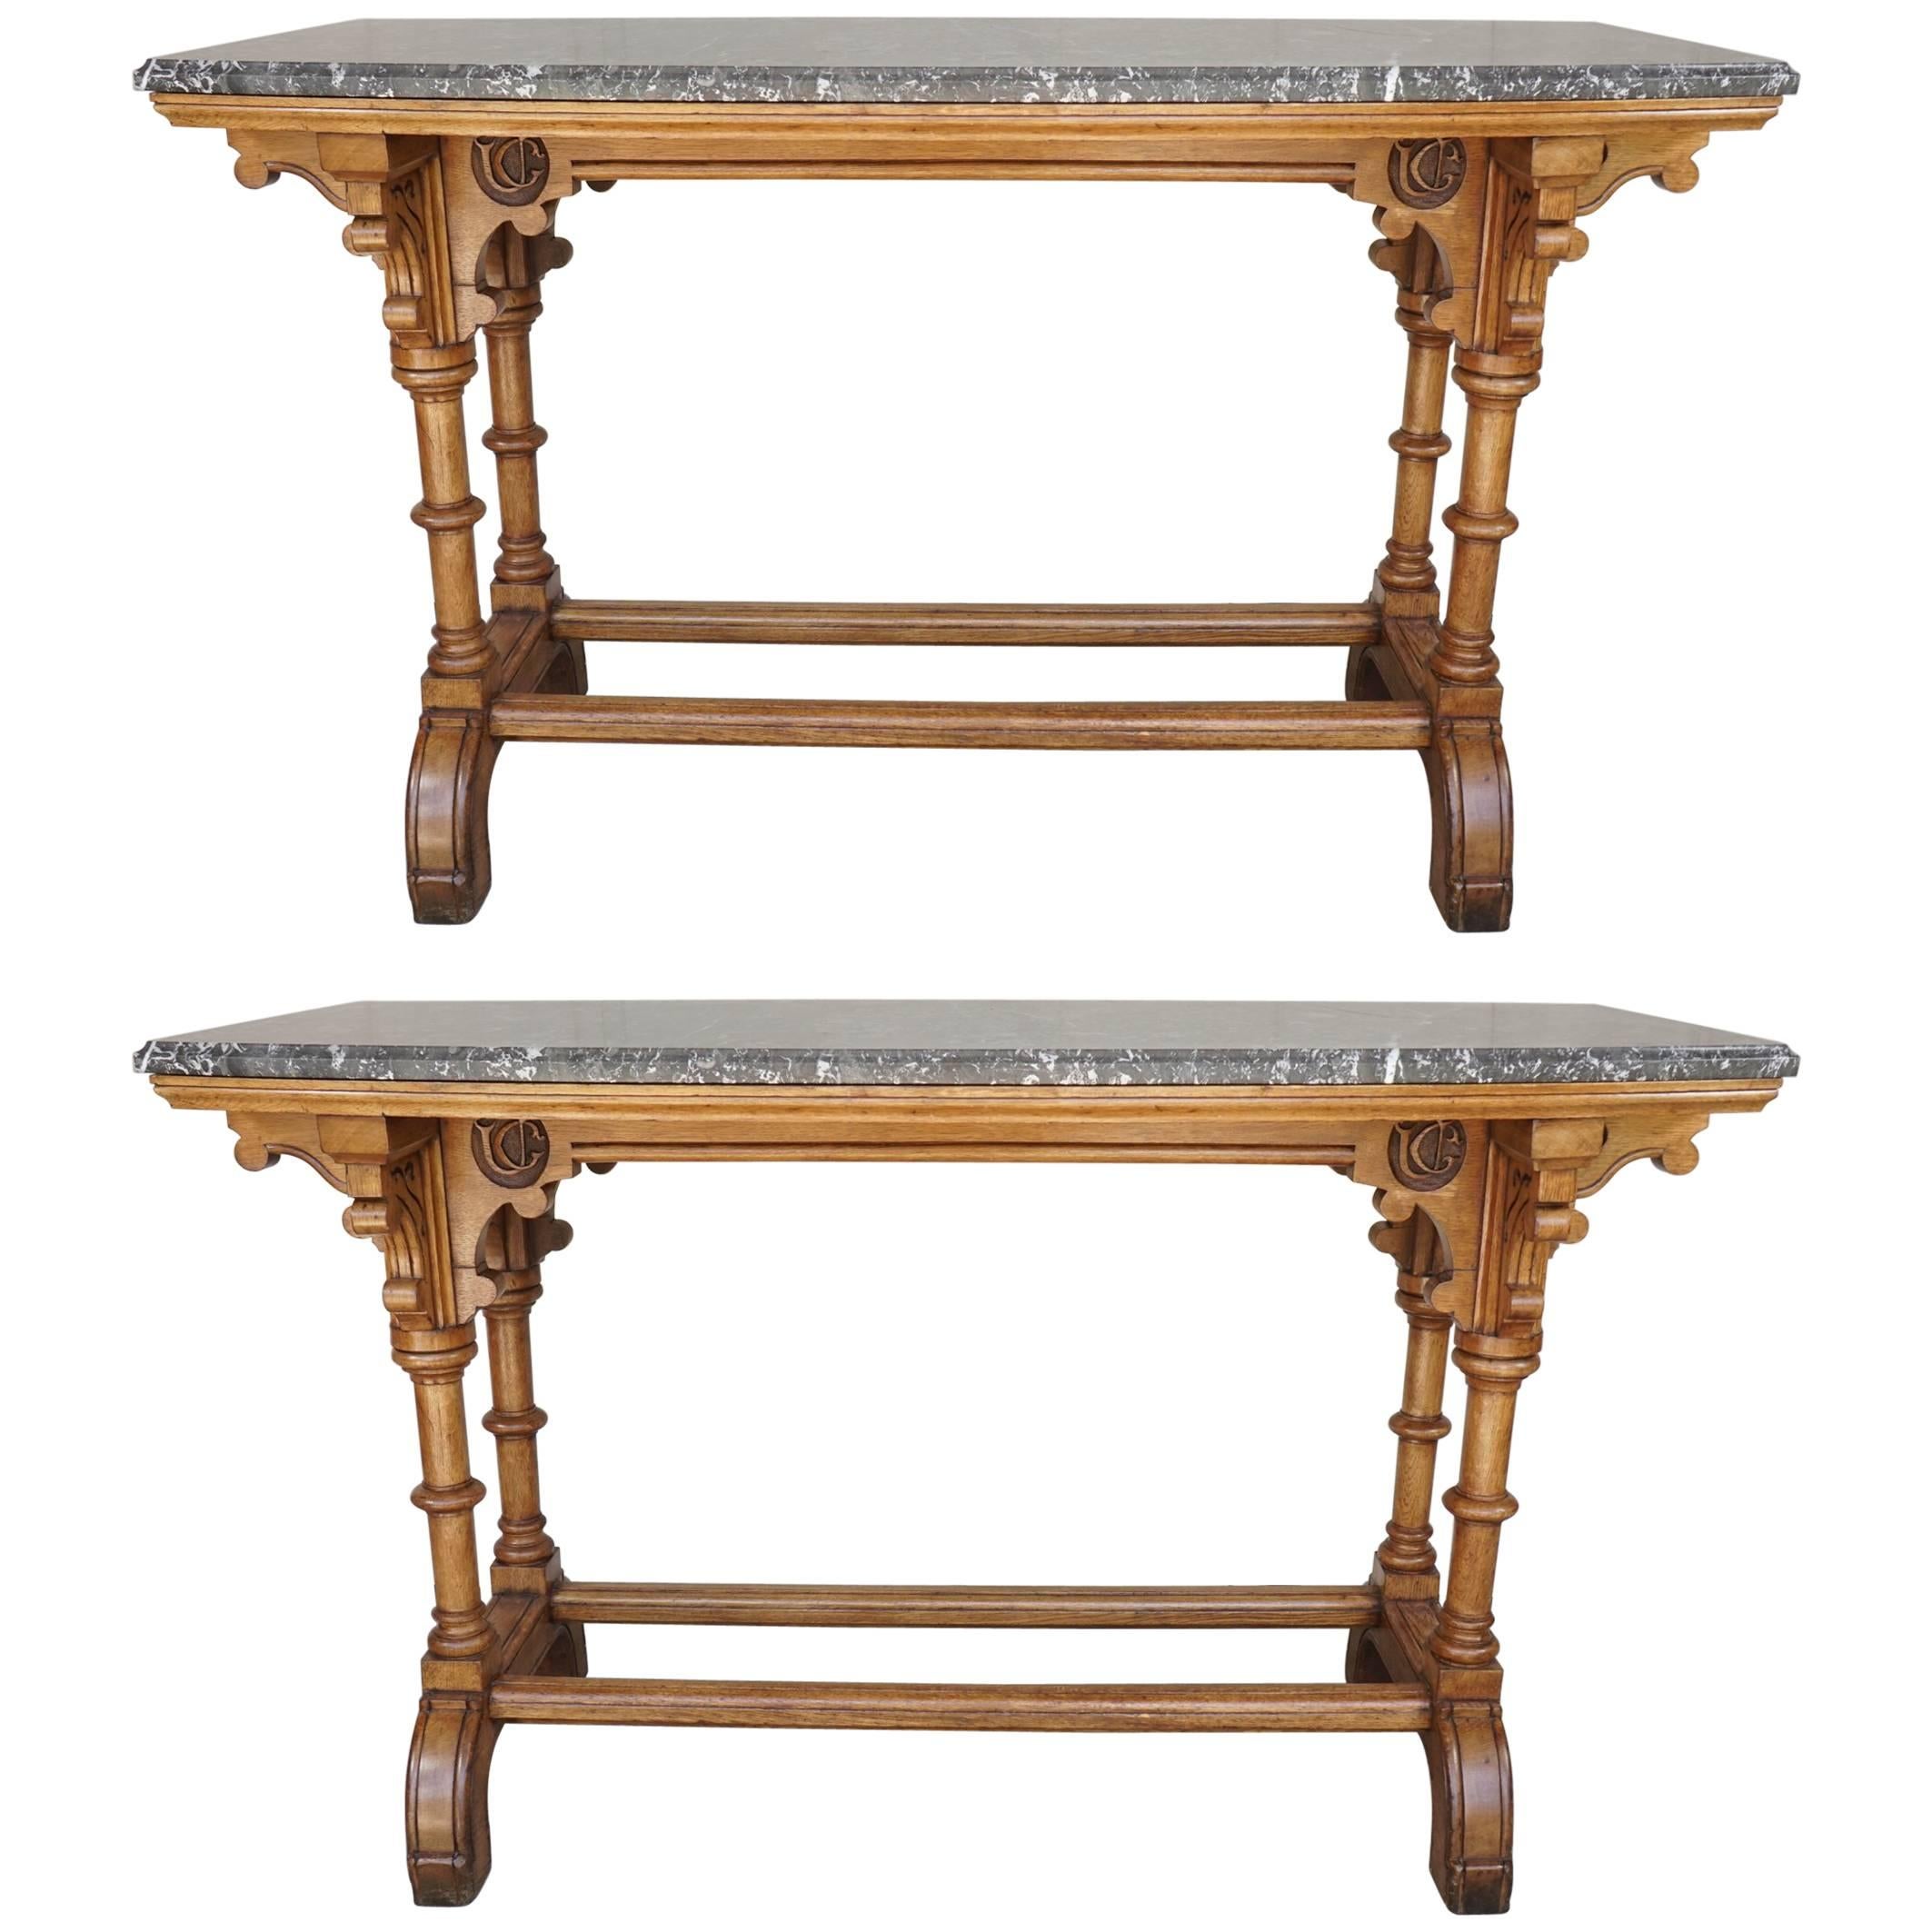 Pair of 19th Century English Reform Gothic Oak Marble Topped Console Tables